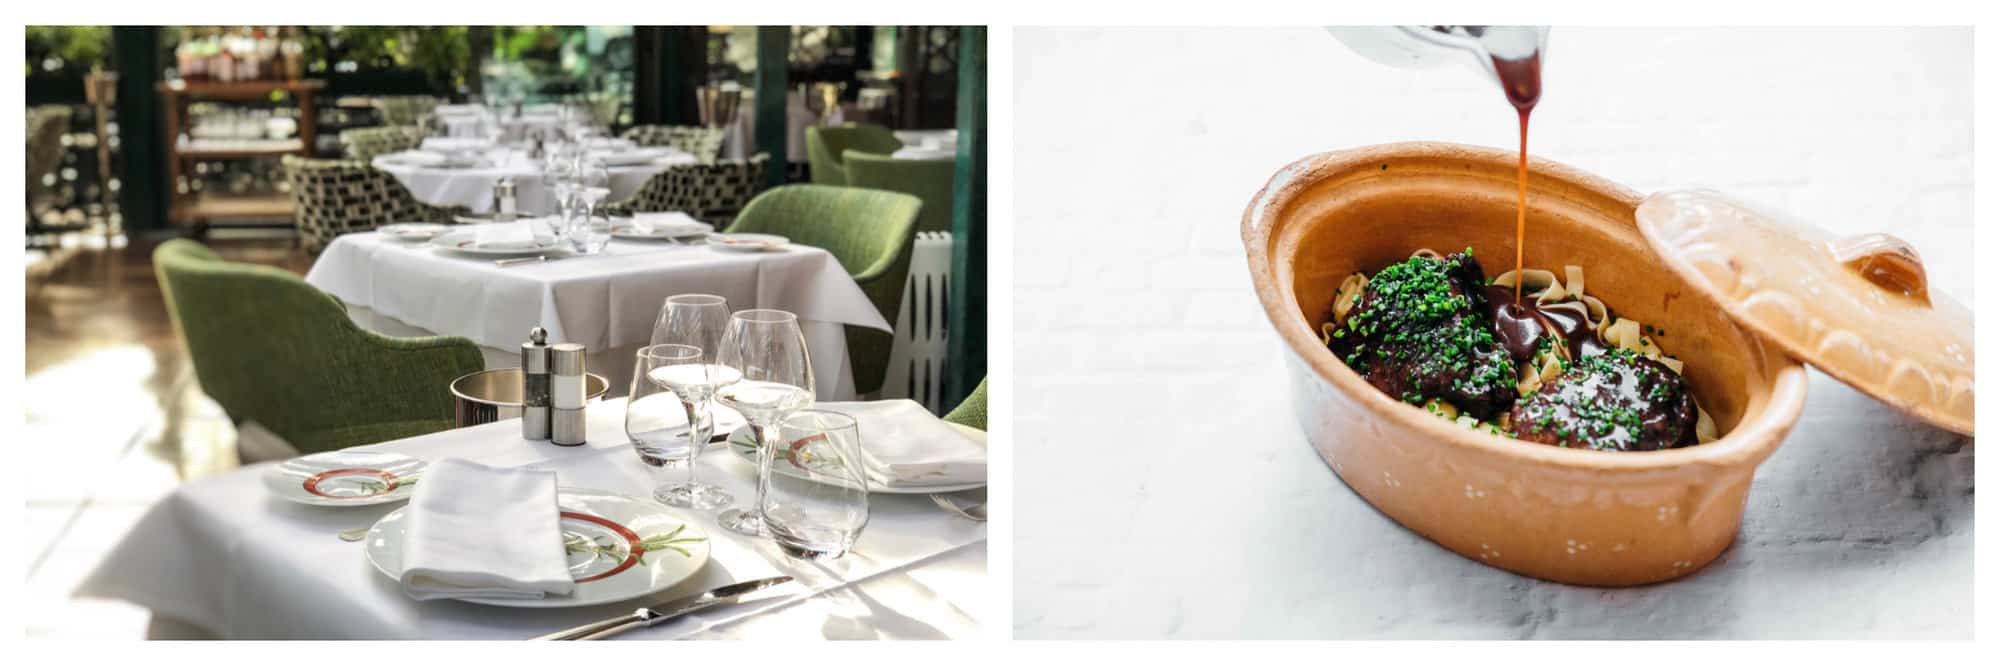 Left: the interior of La Closerie des Lilas restaurant, with white table clothes and green chairs. Right: coq au vin in a casserole pot with sauce being poured on top at Le Coq & Fils restaurant.